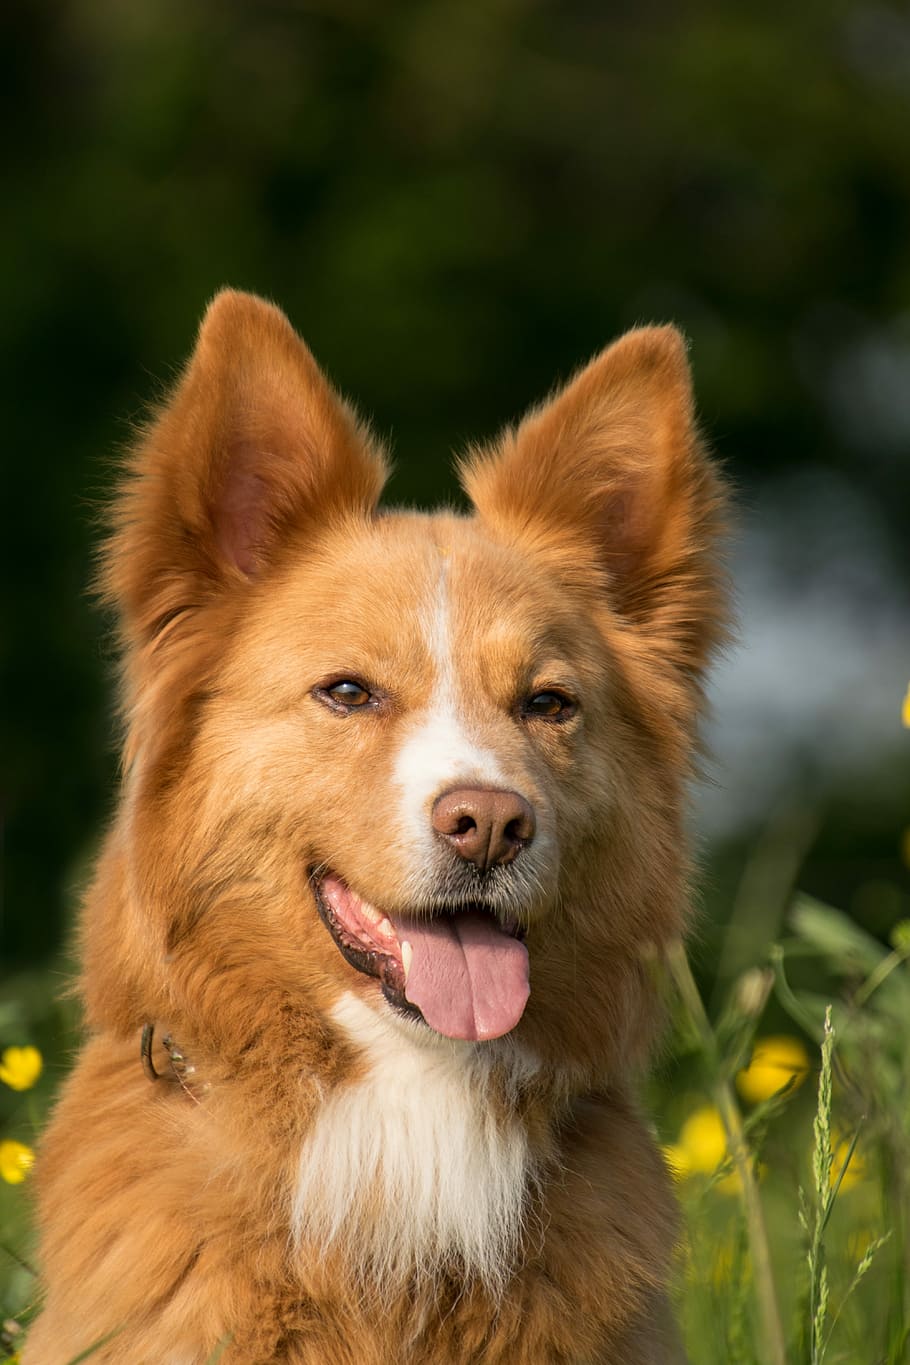 finnish spitz, showing, tongue, staying, flower field, dog, portrait, animal, meadow, one animal